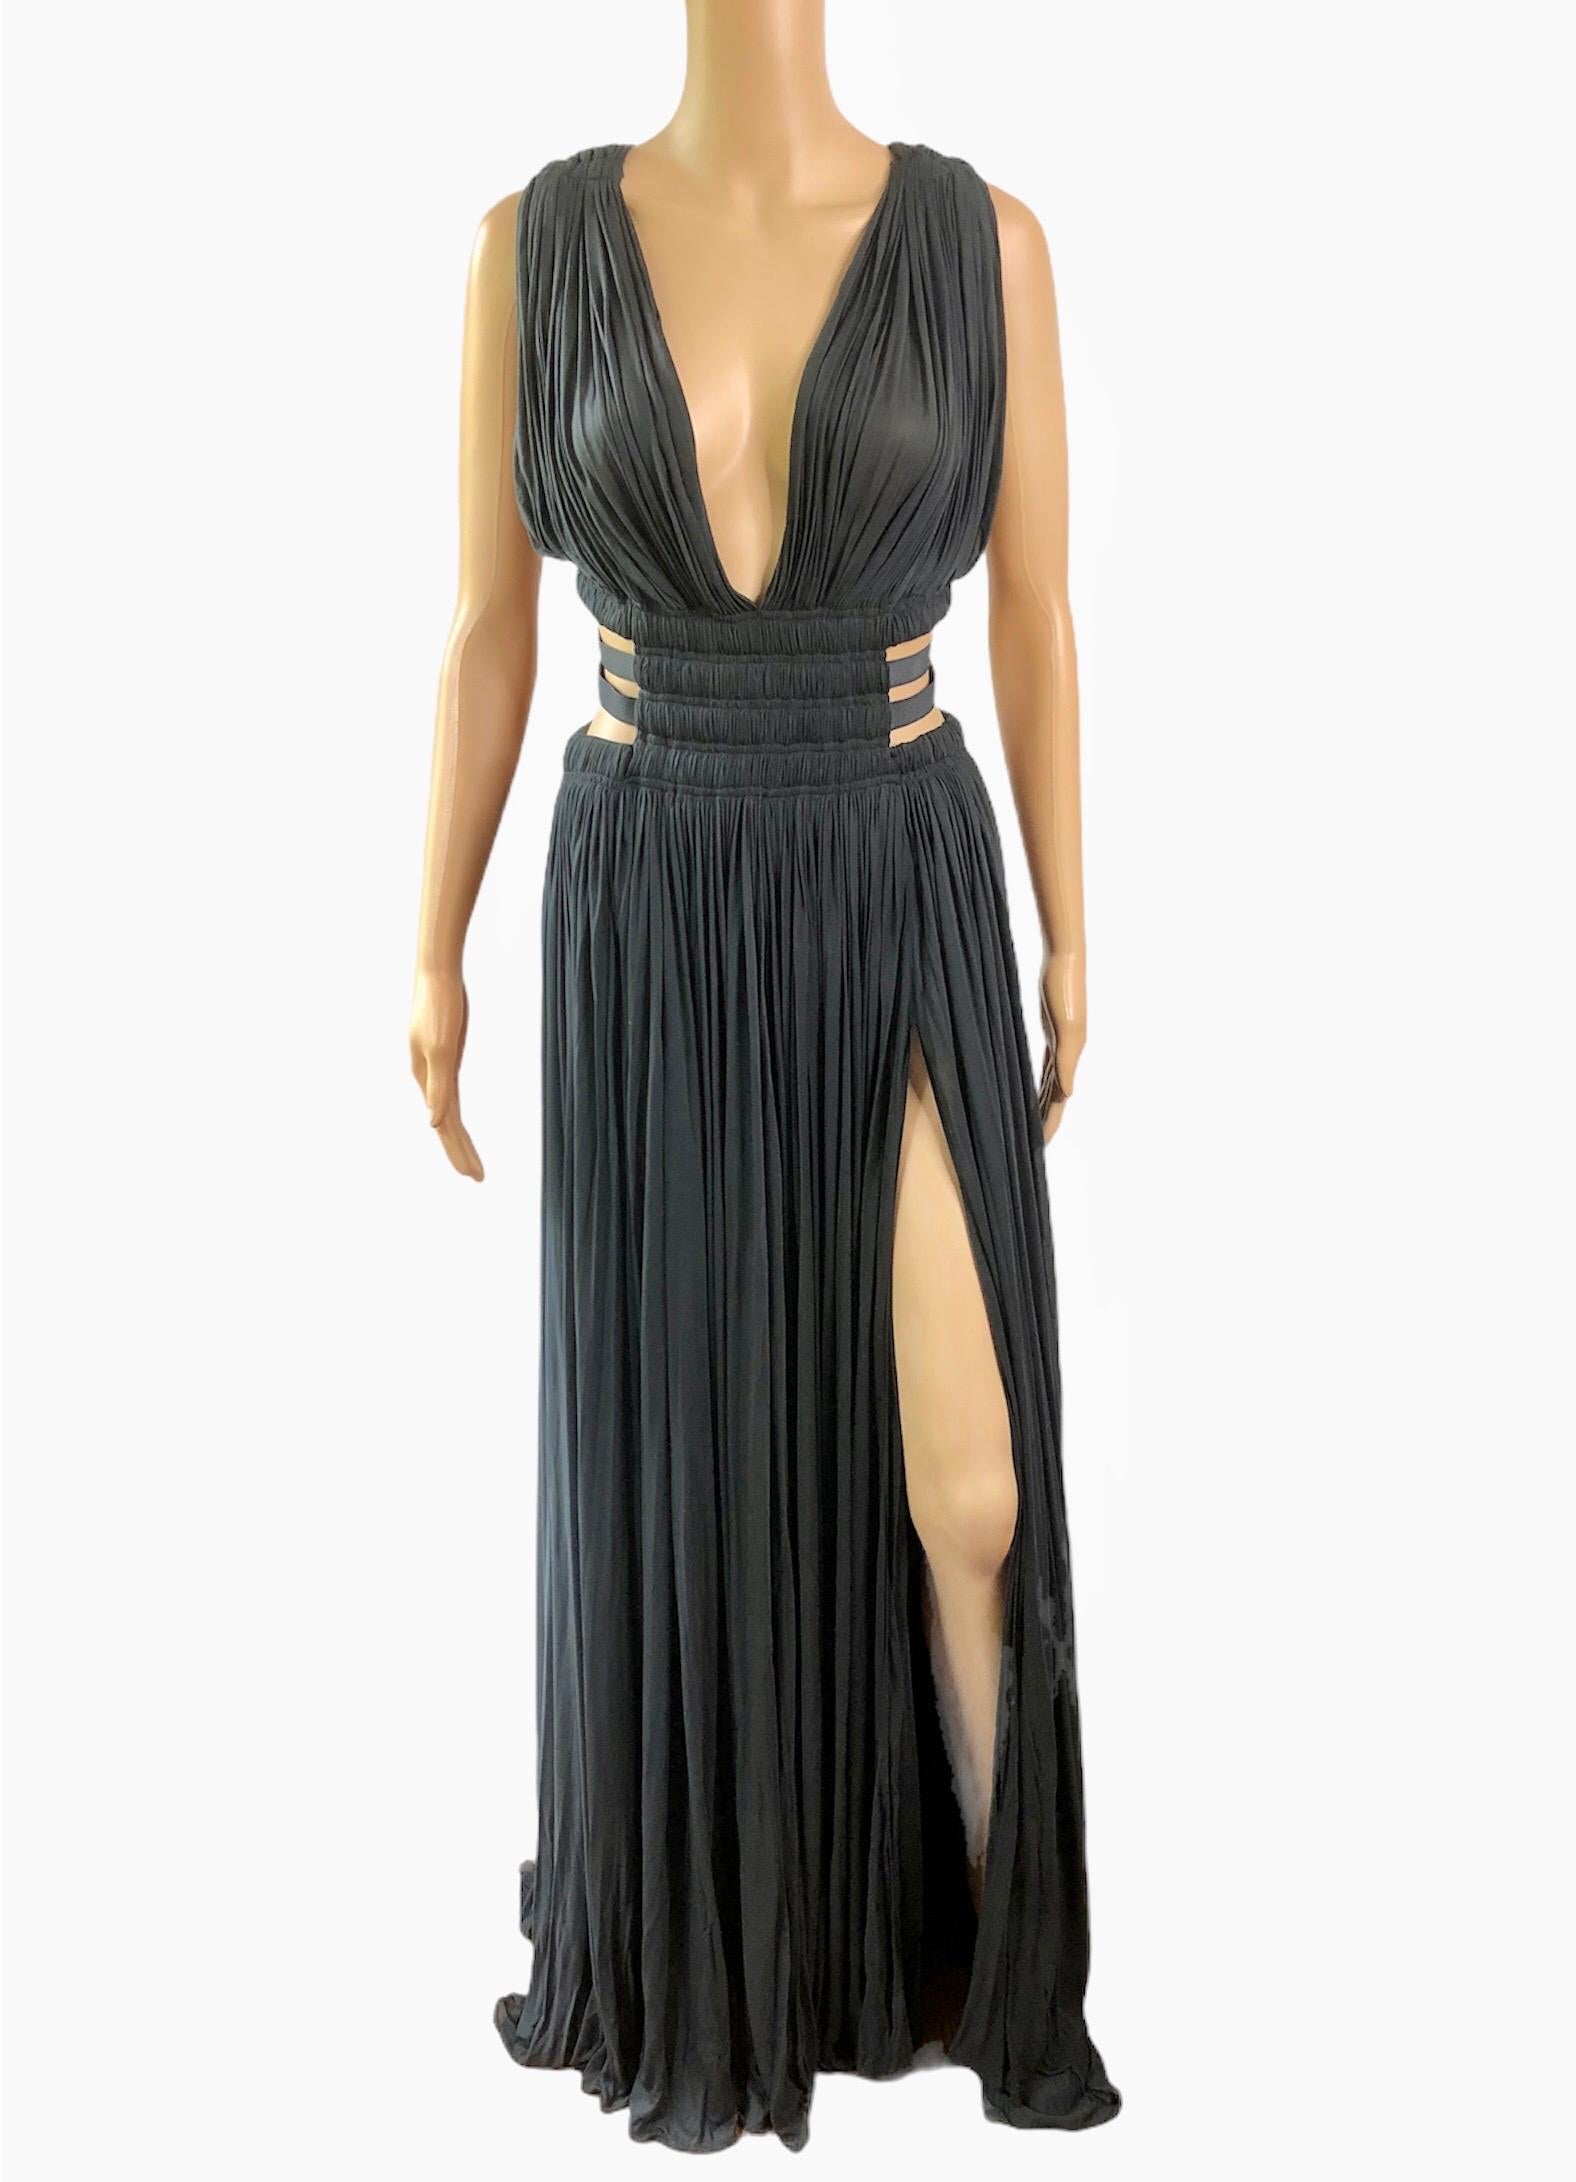 Azzedine Alaïa Semi-Sheer Cutout Ruched High Slits Gown Maxi Evening Dress FR 40

As seen on Naomi Campbell in the black color. Azzedine Alaia semi-sheer ruched dress featuring cutout sides with elastic bands and a hidden bodysuit with snap closure.
